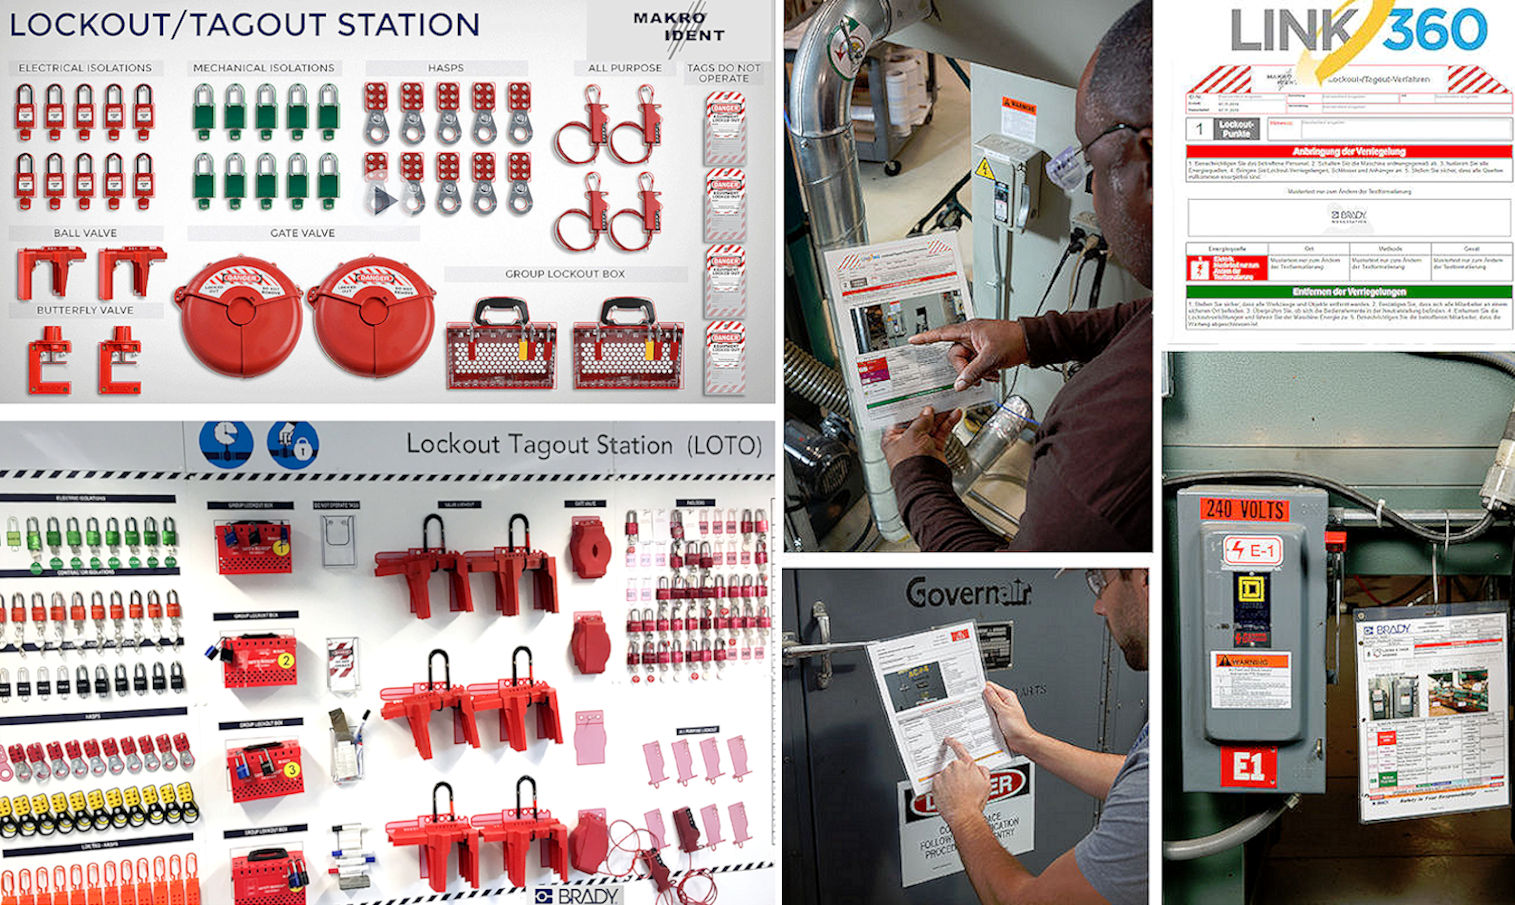 lockout-tagout-shadowboard Shadowboards mit passendem Lockout-Tagout Equipment